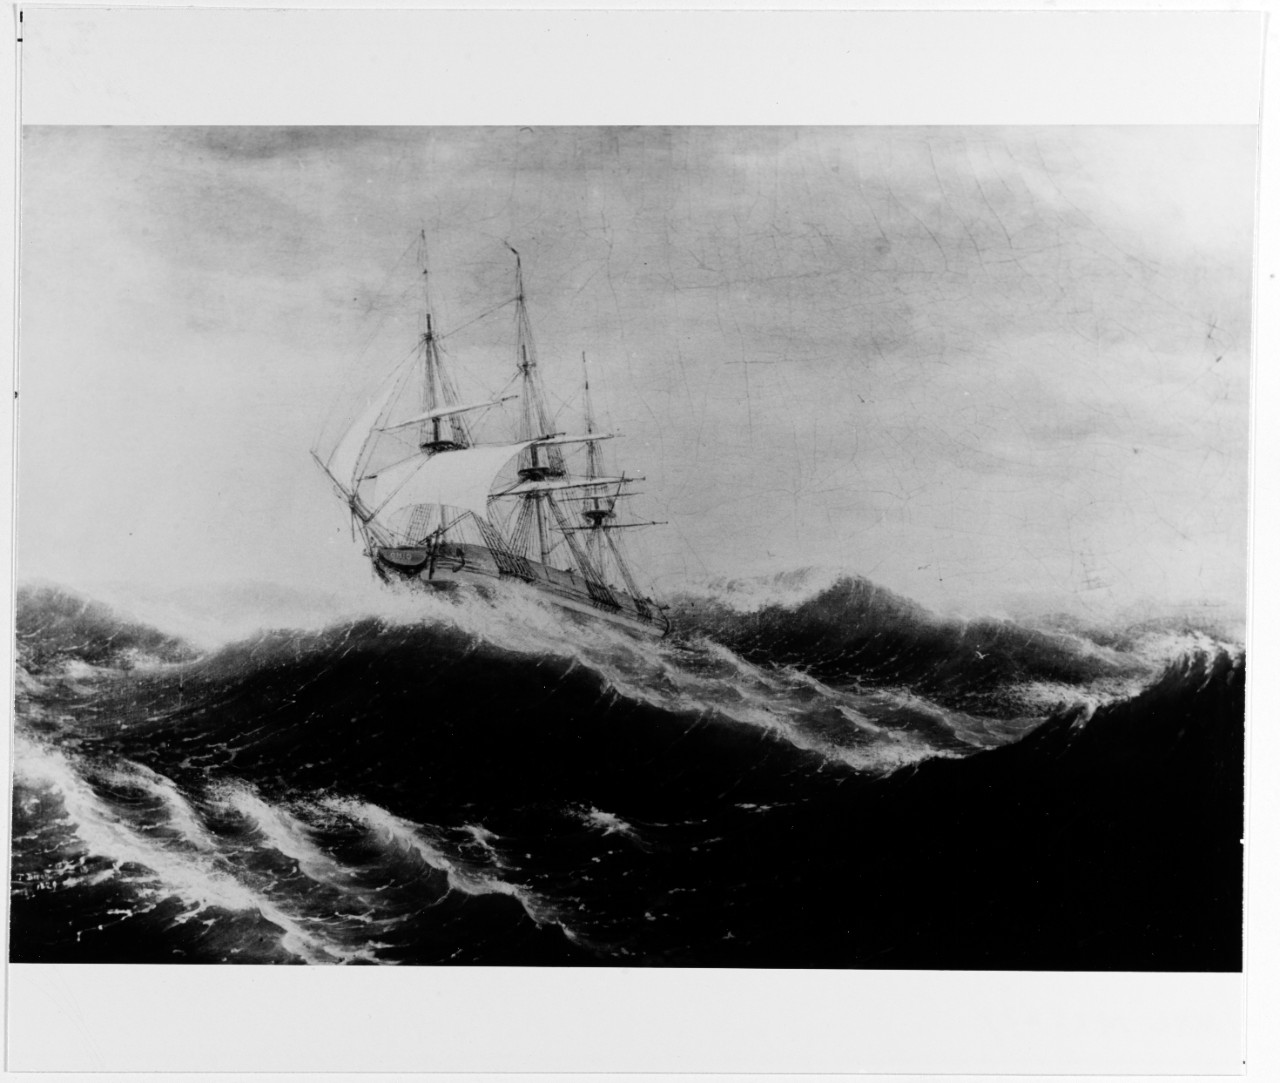 Ship OHIO in a storm